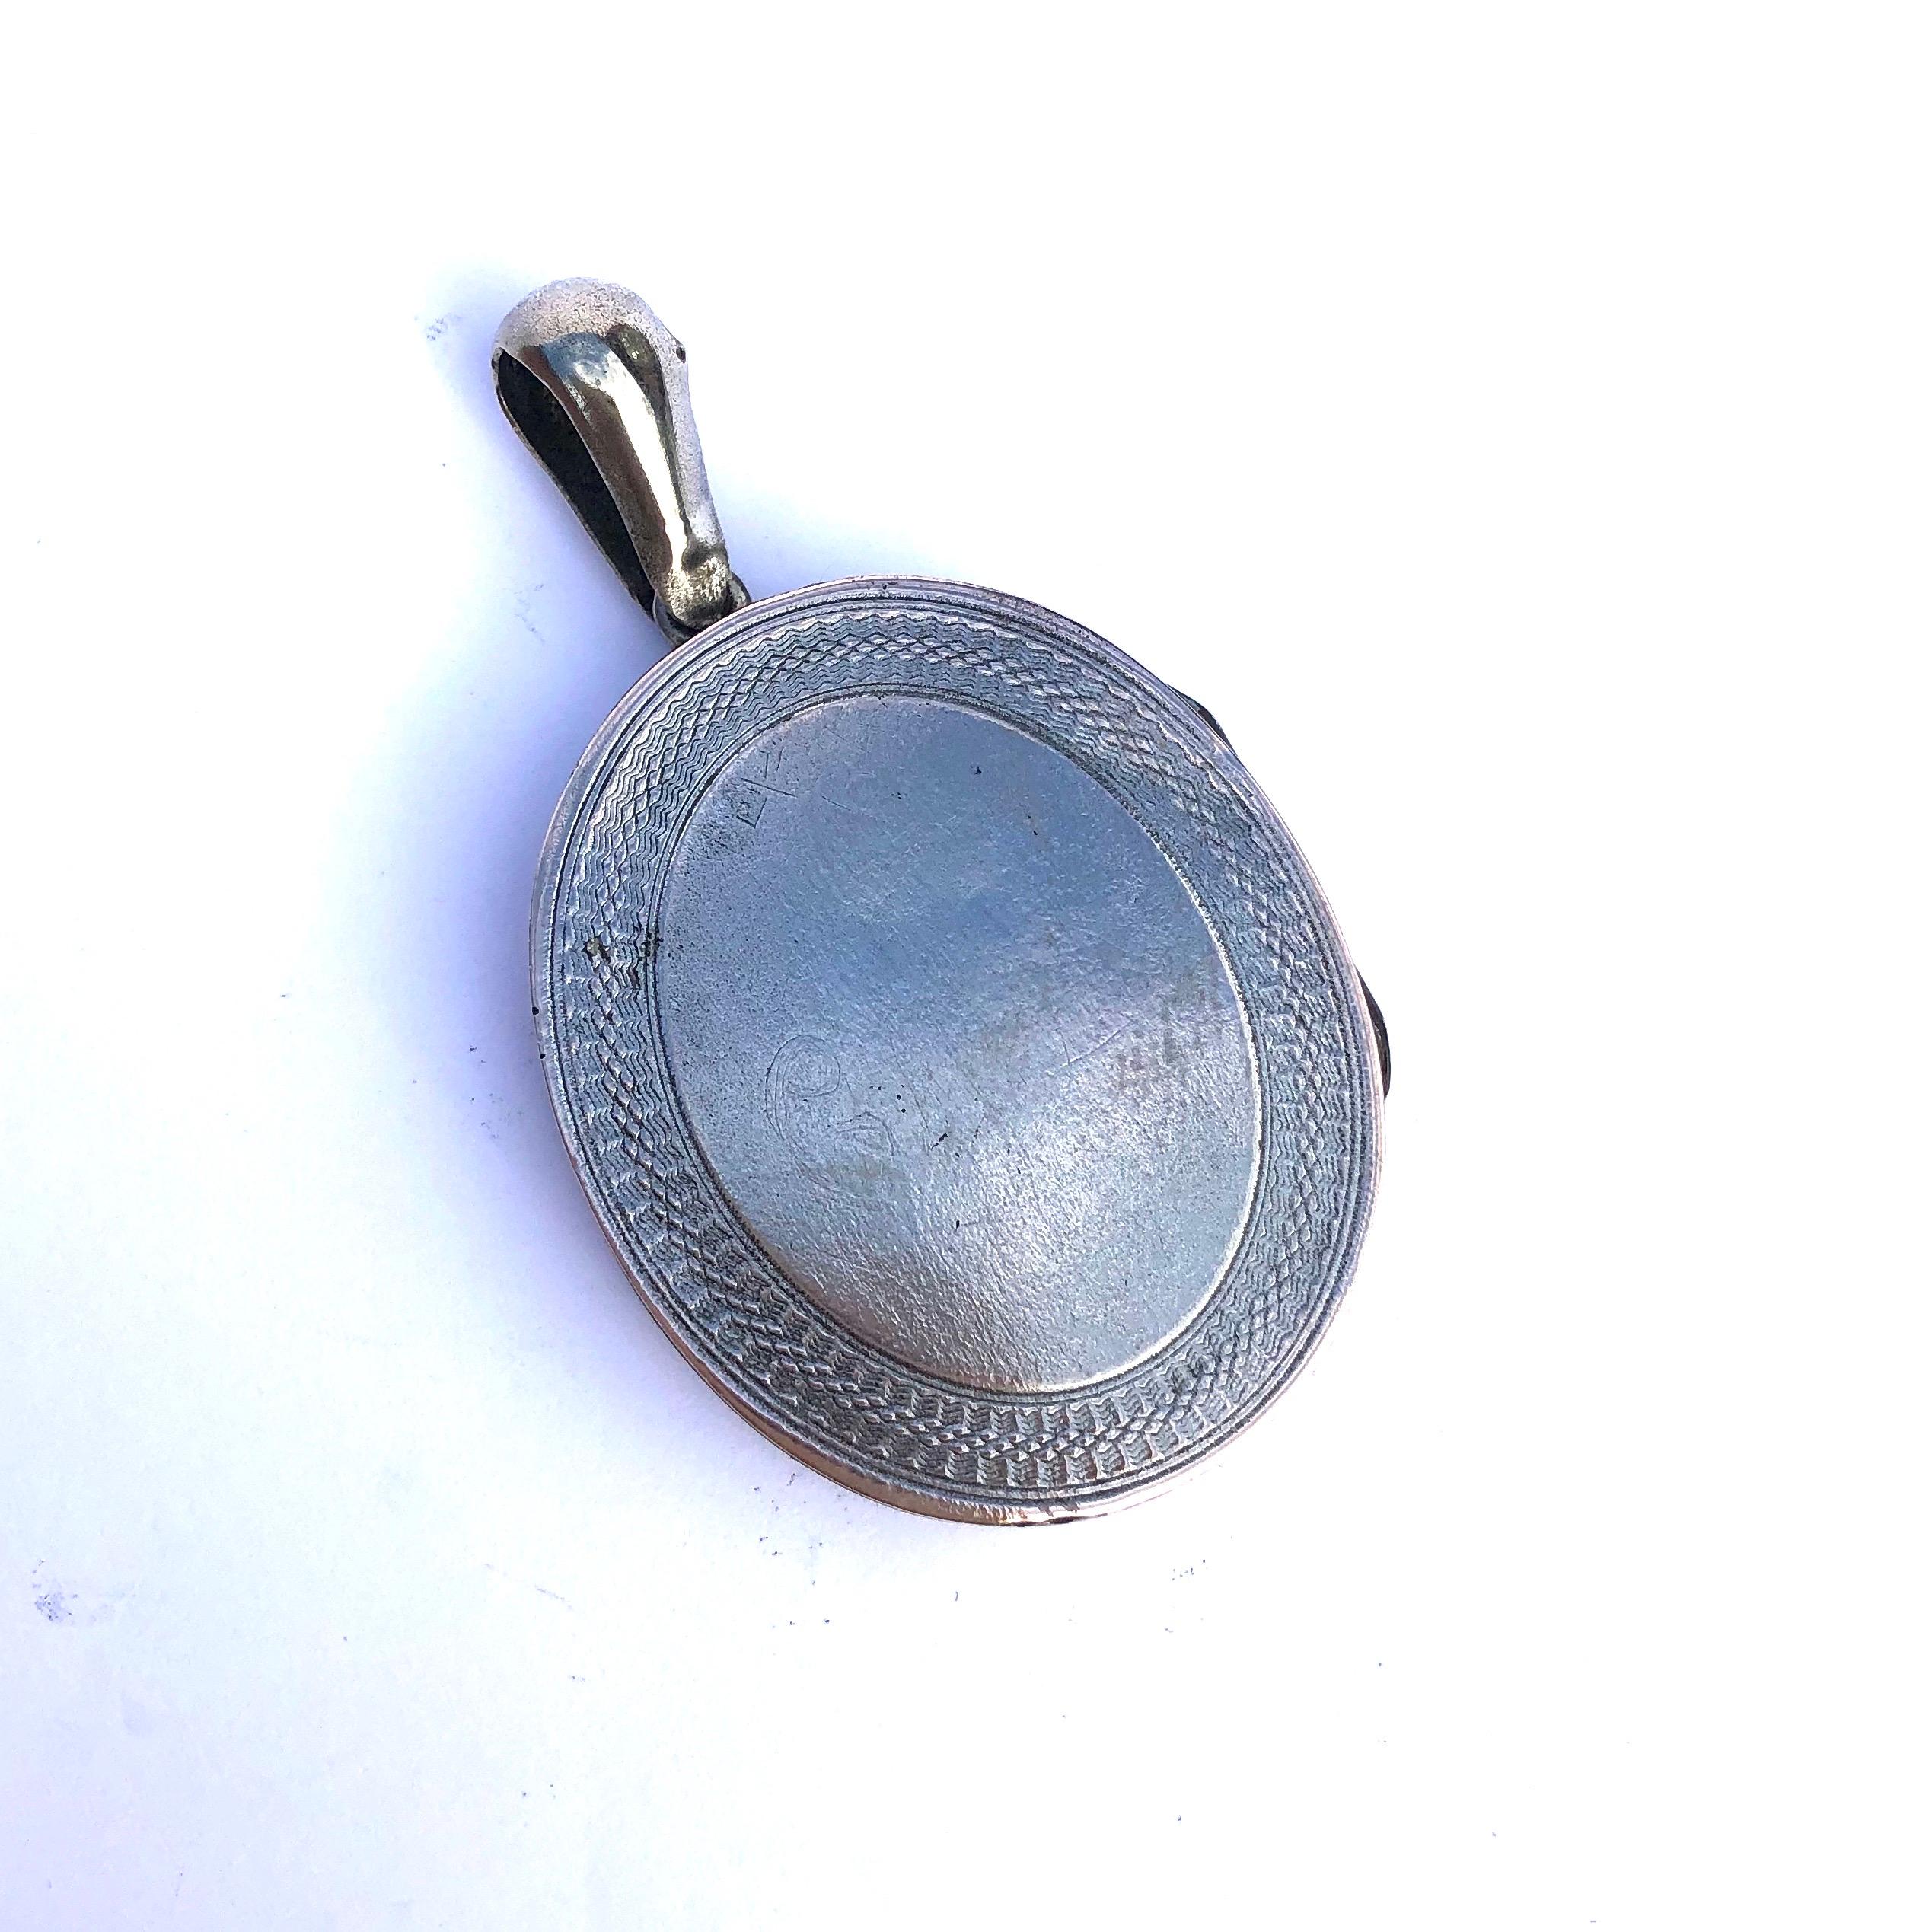 This rather modern looking locket features engraved detail and silver layers. The engraving includes leaves, lines and wonderful texture. One of the sides inside the locket has a complete compartment. 

Dimensions Inc Loop: 56x 33mm

Weight: 14.7g